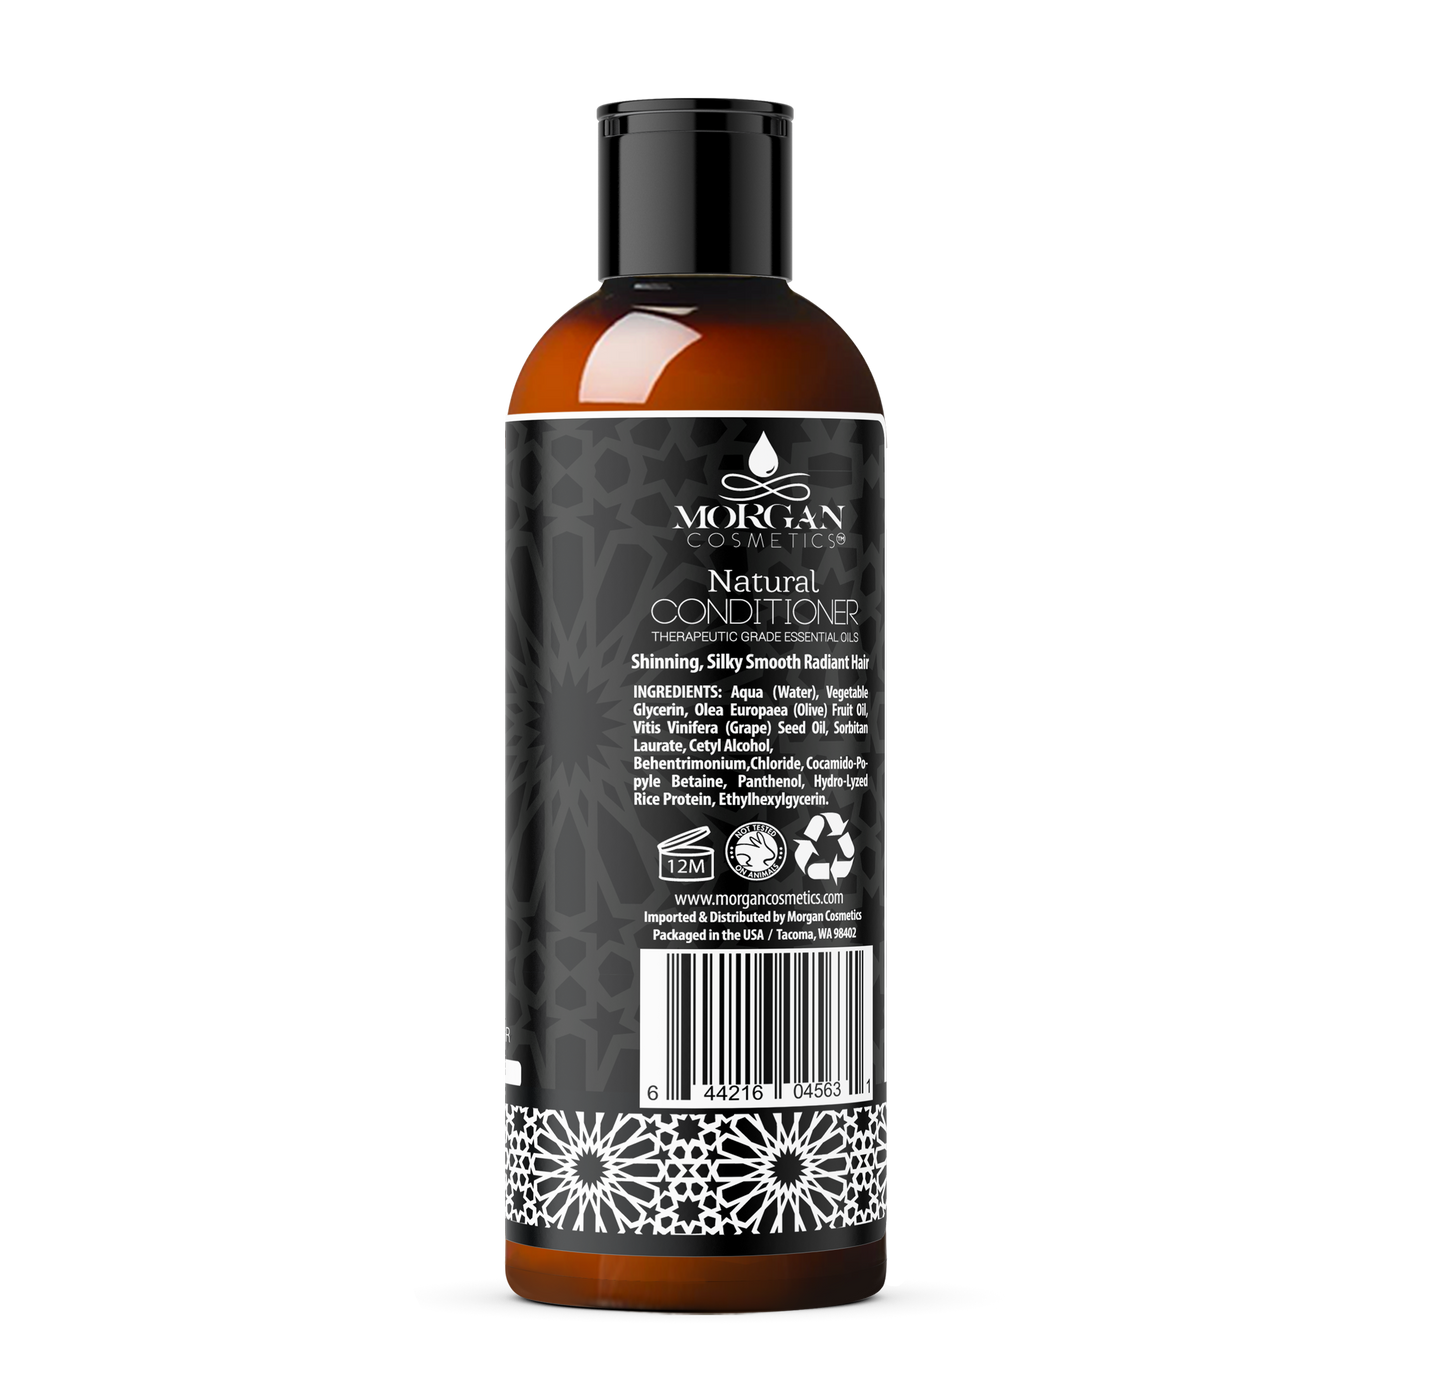 ARGAN NATURAL CONDITIONER LAVENDER 16 OZ Conditioner Lavender - Argan Conditioner Is Also Paraben Free and Synthetic Fragrance Free - 100% Vegetarian. Made In USA. by Morgan Cosmetics